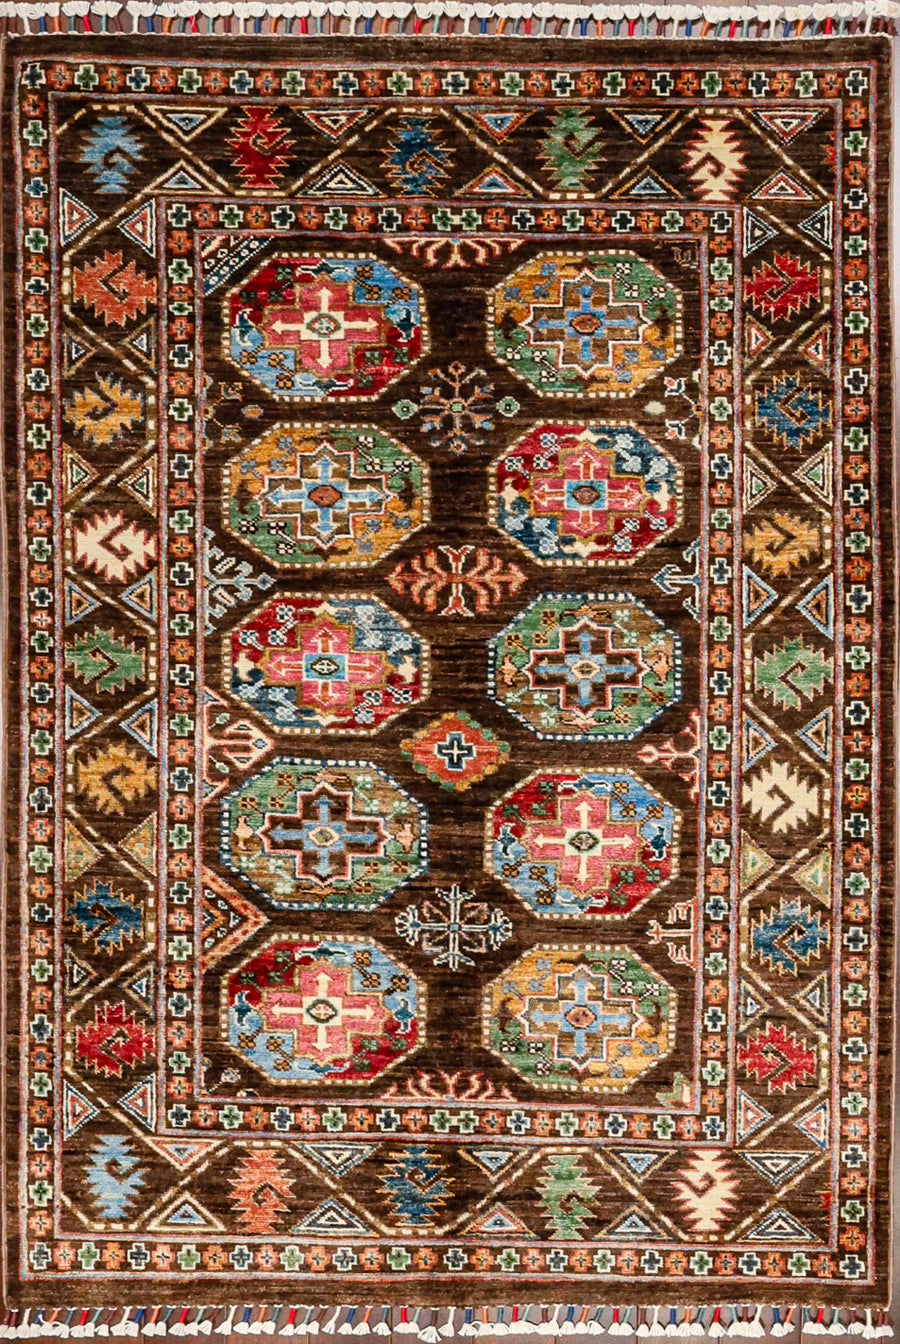 A colorful version of the classic Bokhara pattern hand-knotted in wool and made in Pakistan. The smaller area rug features a colorful assortment of tribal octagonal shapes in jewell tones against a brown background.  